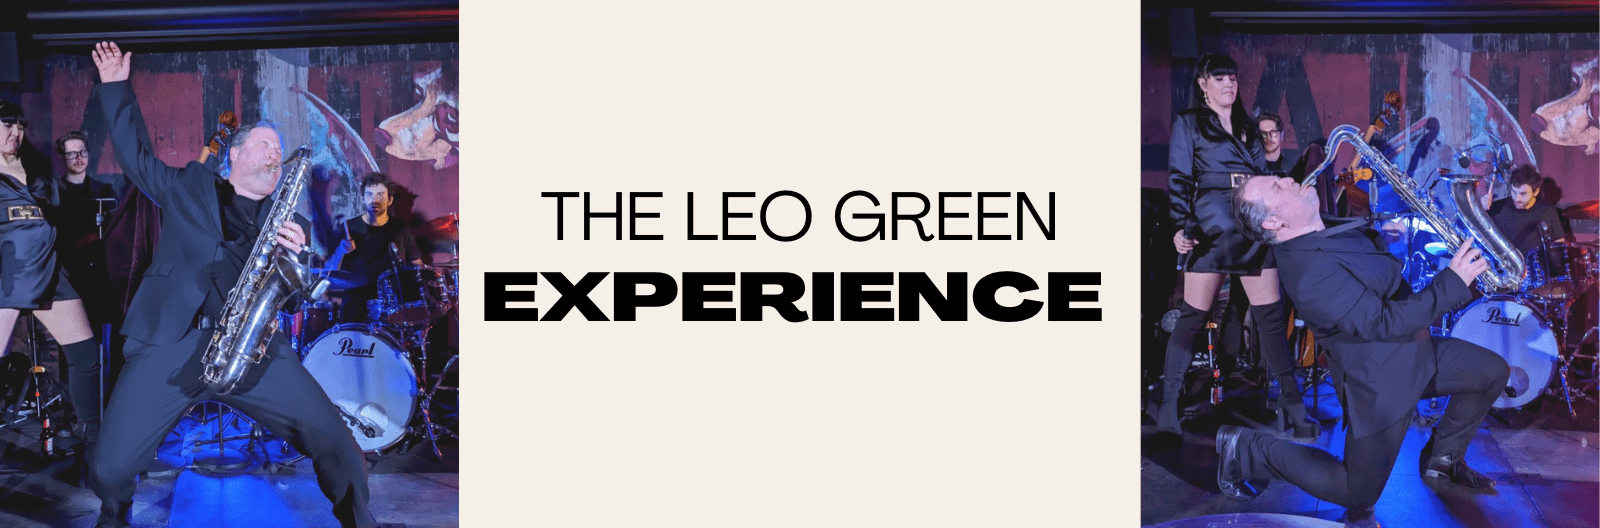 The Leo Green Experience Live